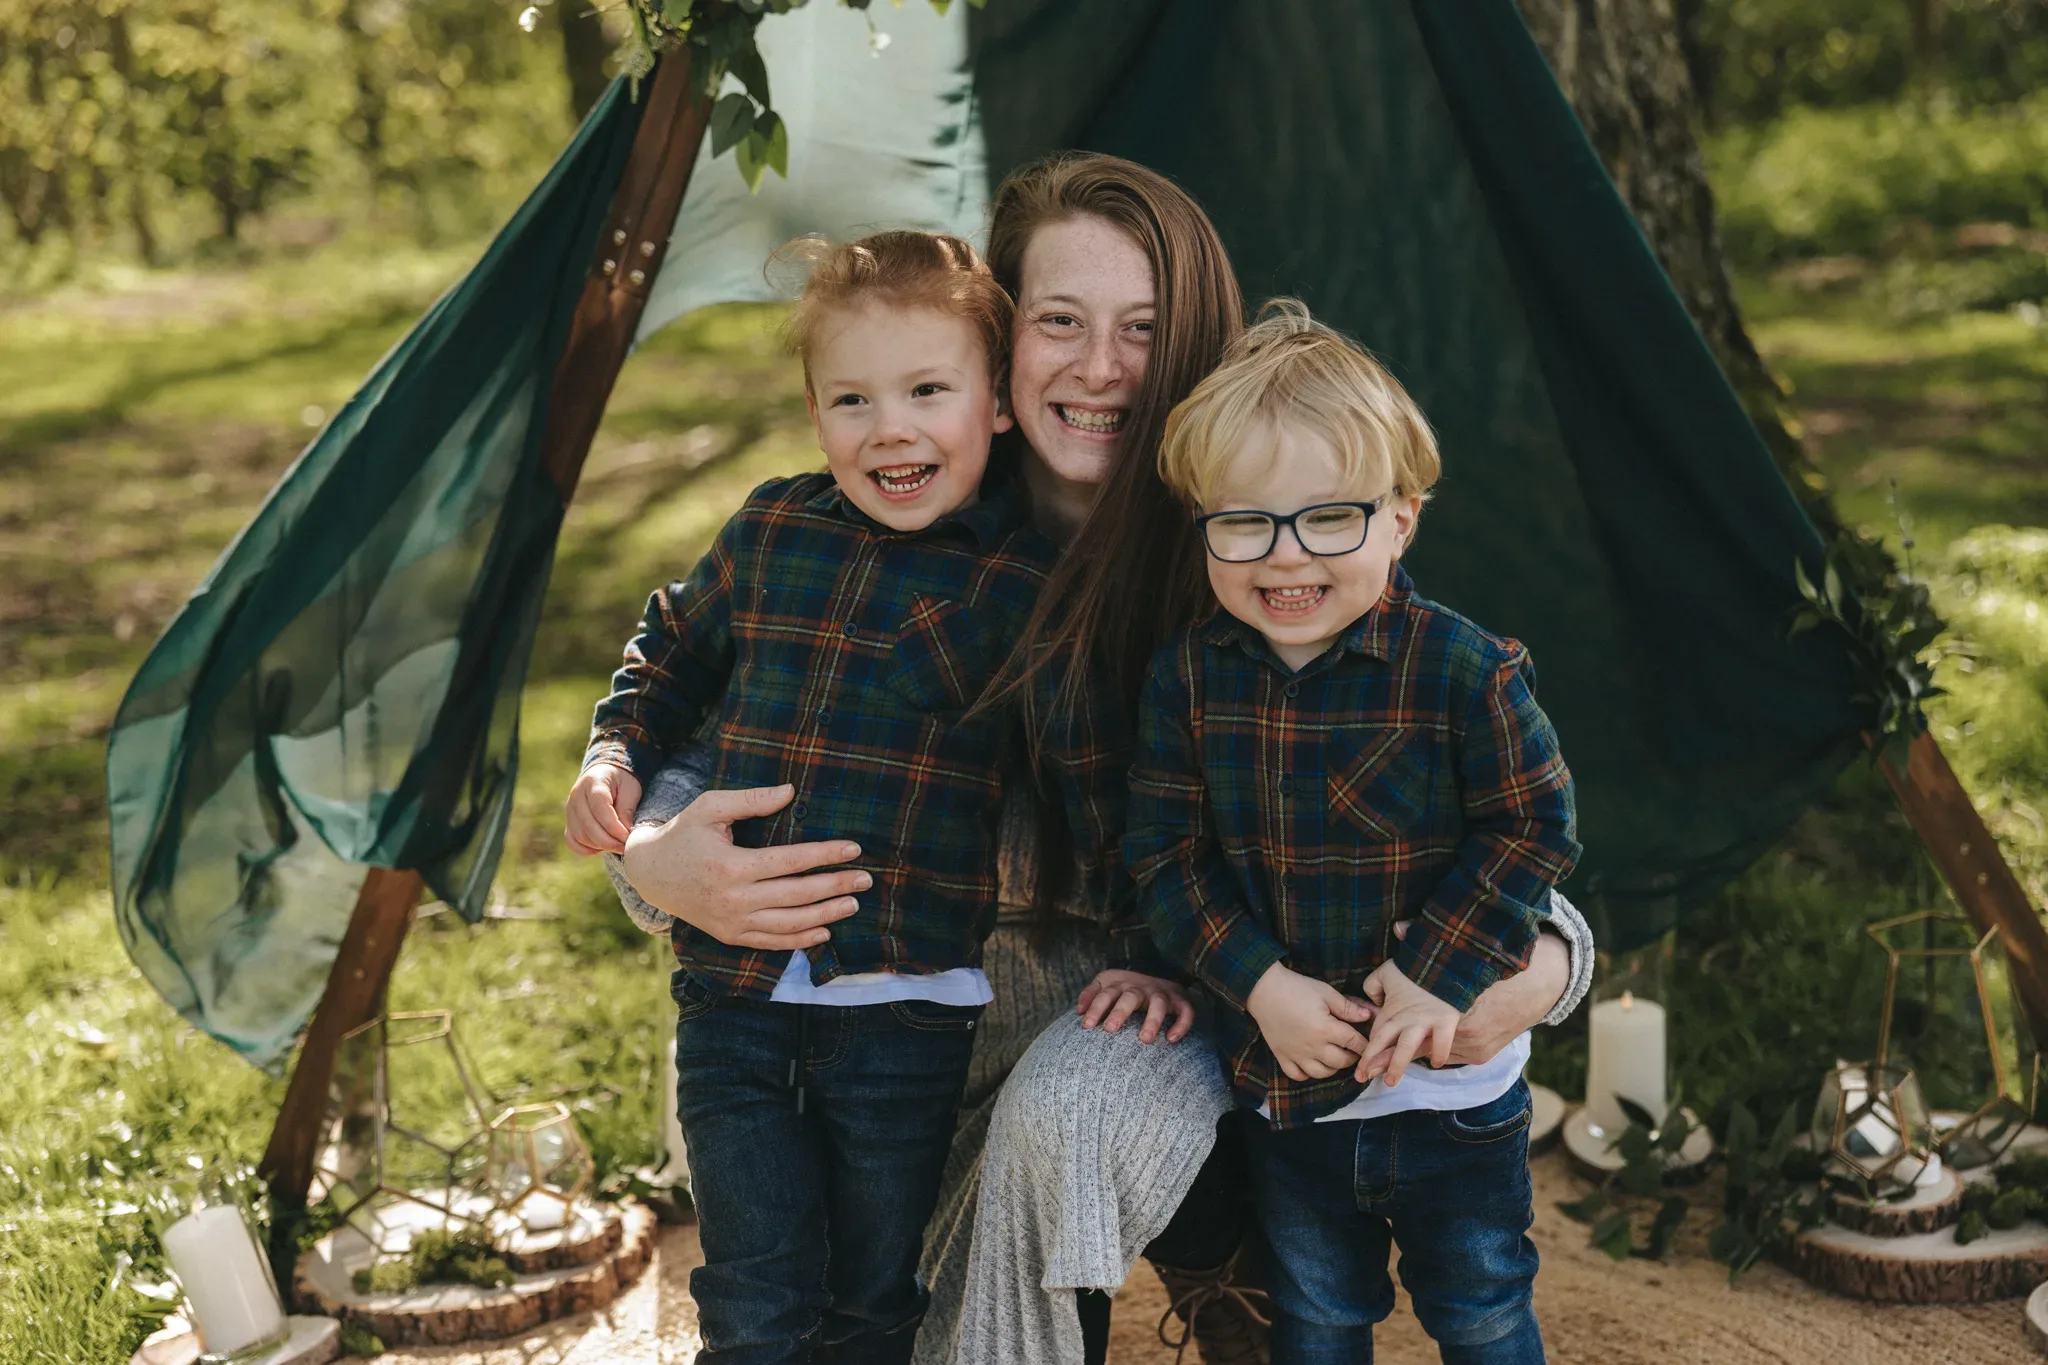 A joyful woman sits outdoors with two young children, all wearing matching plaid shirts, in front of a teepee-style tent adorned with greenery in a sunny, grassy area. the children, one with glasses, smile brightly, holding paper crafts.